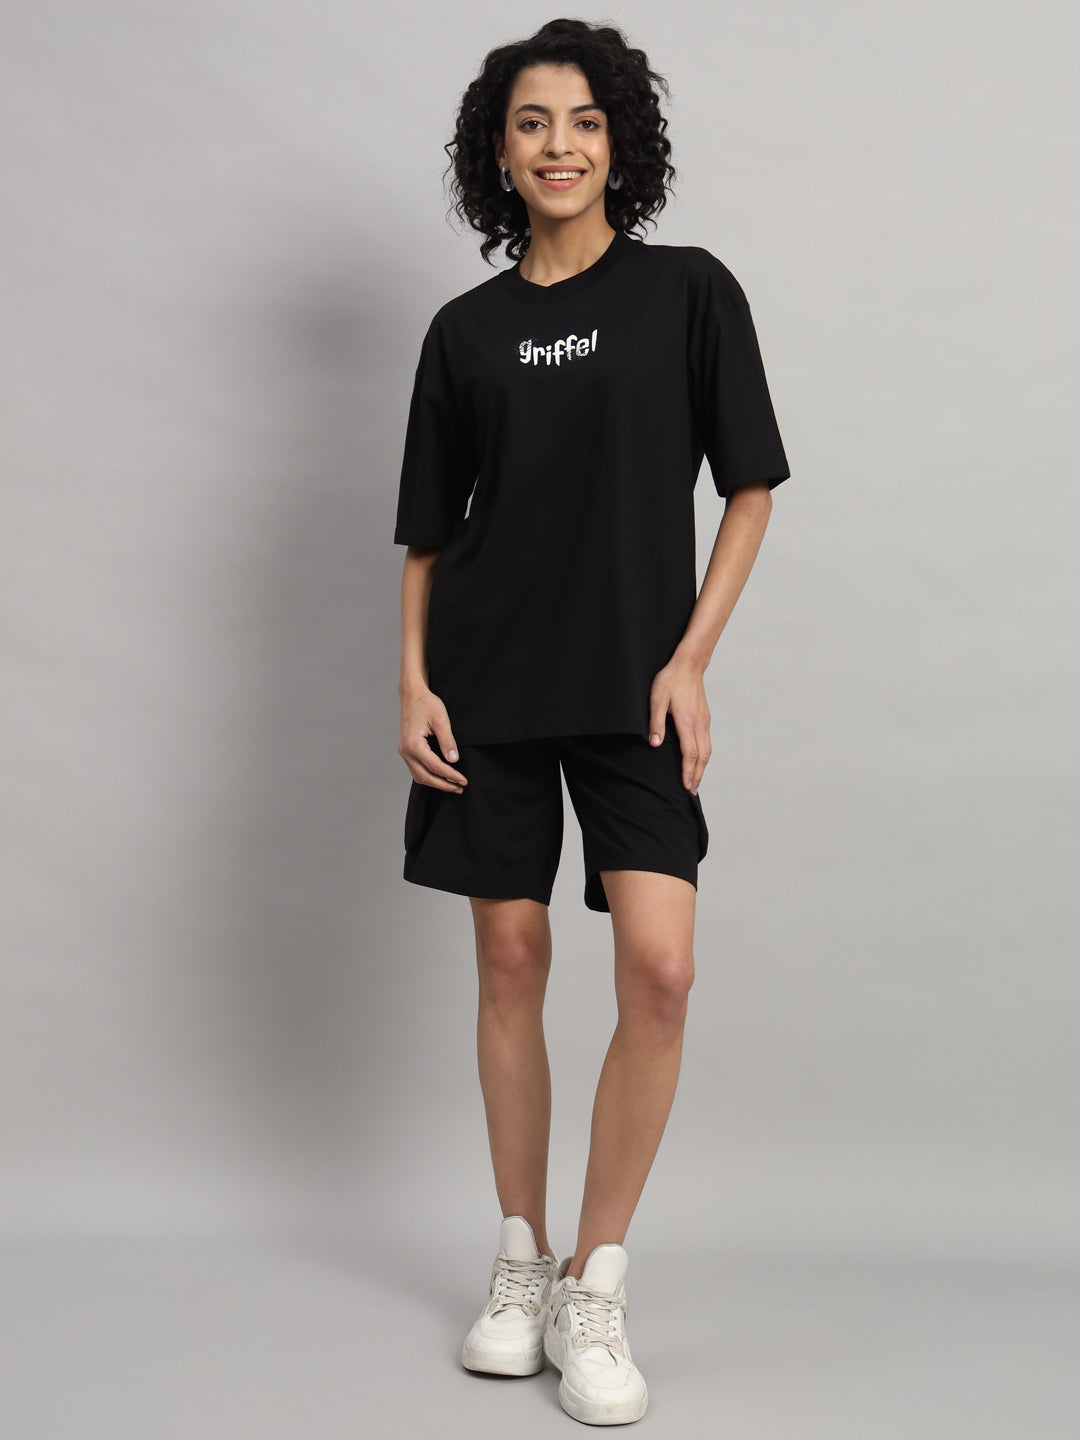 Spider T-shirt and Short Set - griffel